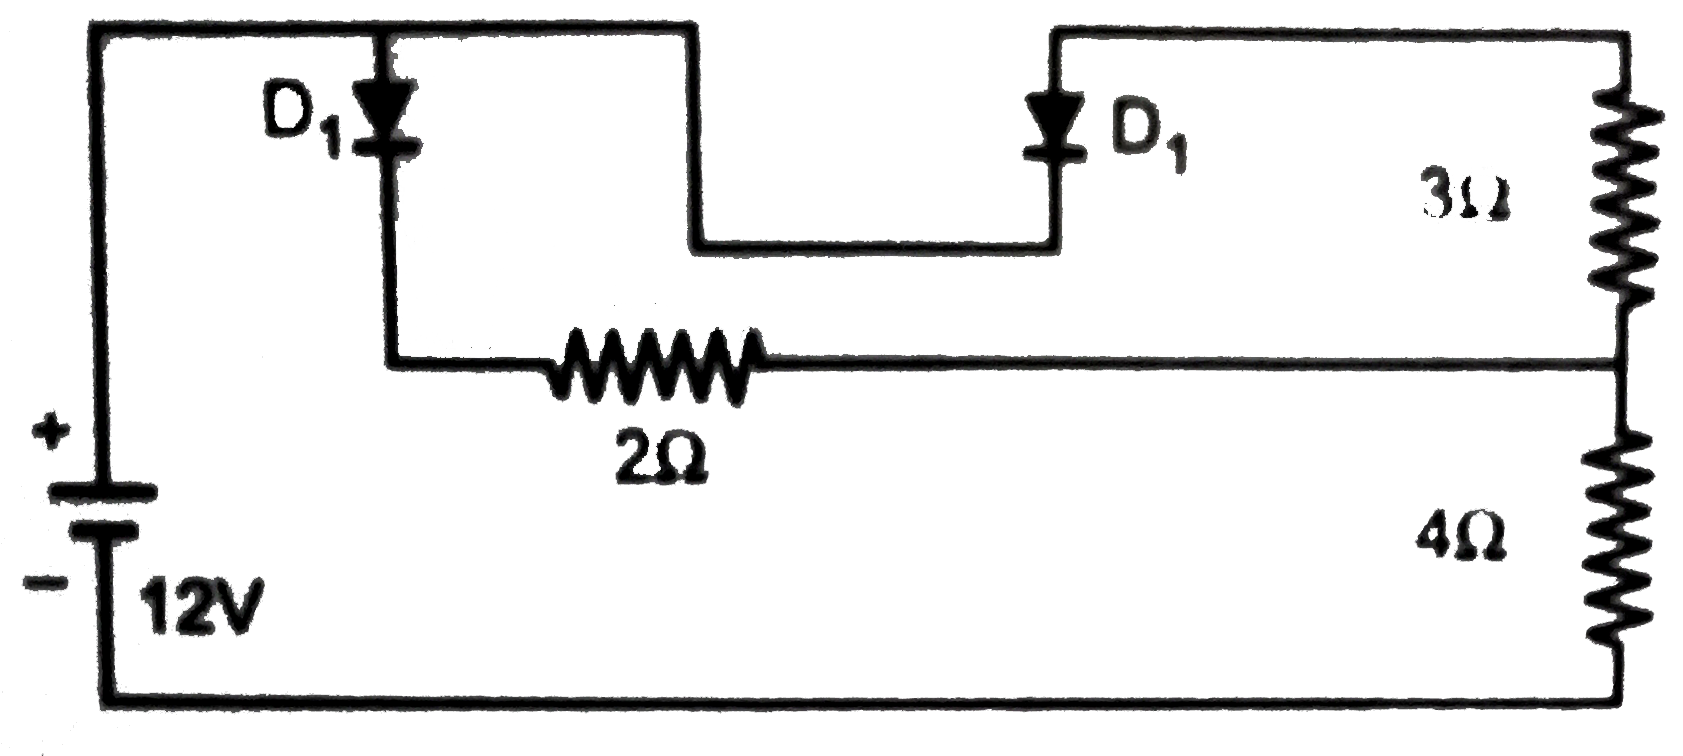 In the circuit of figure. Treat the diodes as ideal. Current in the 4 ohm resistor is